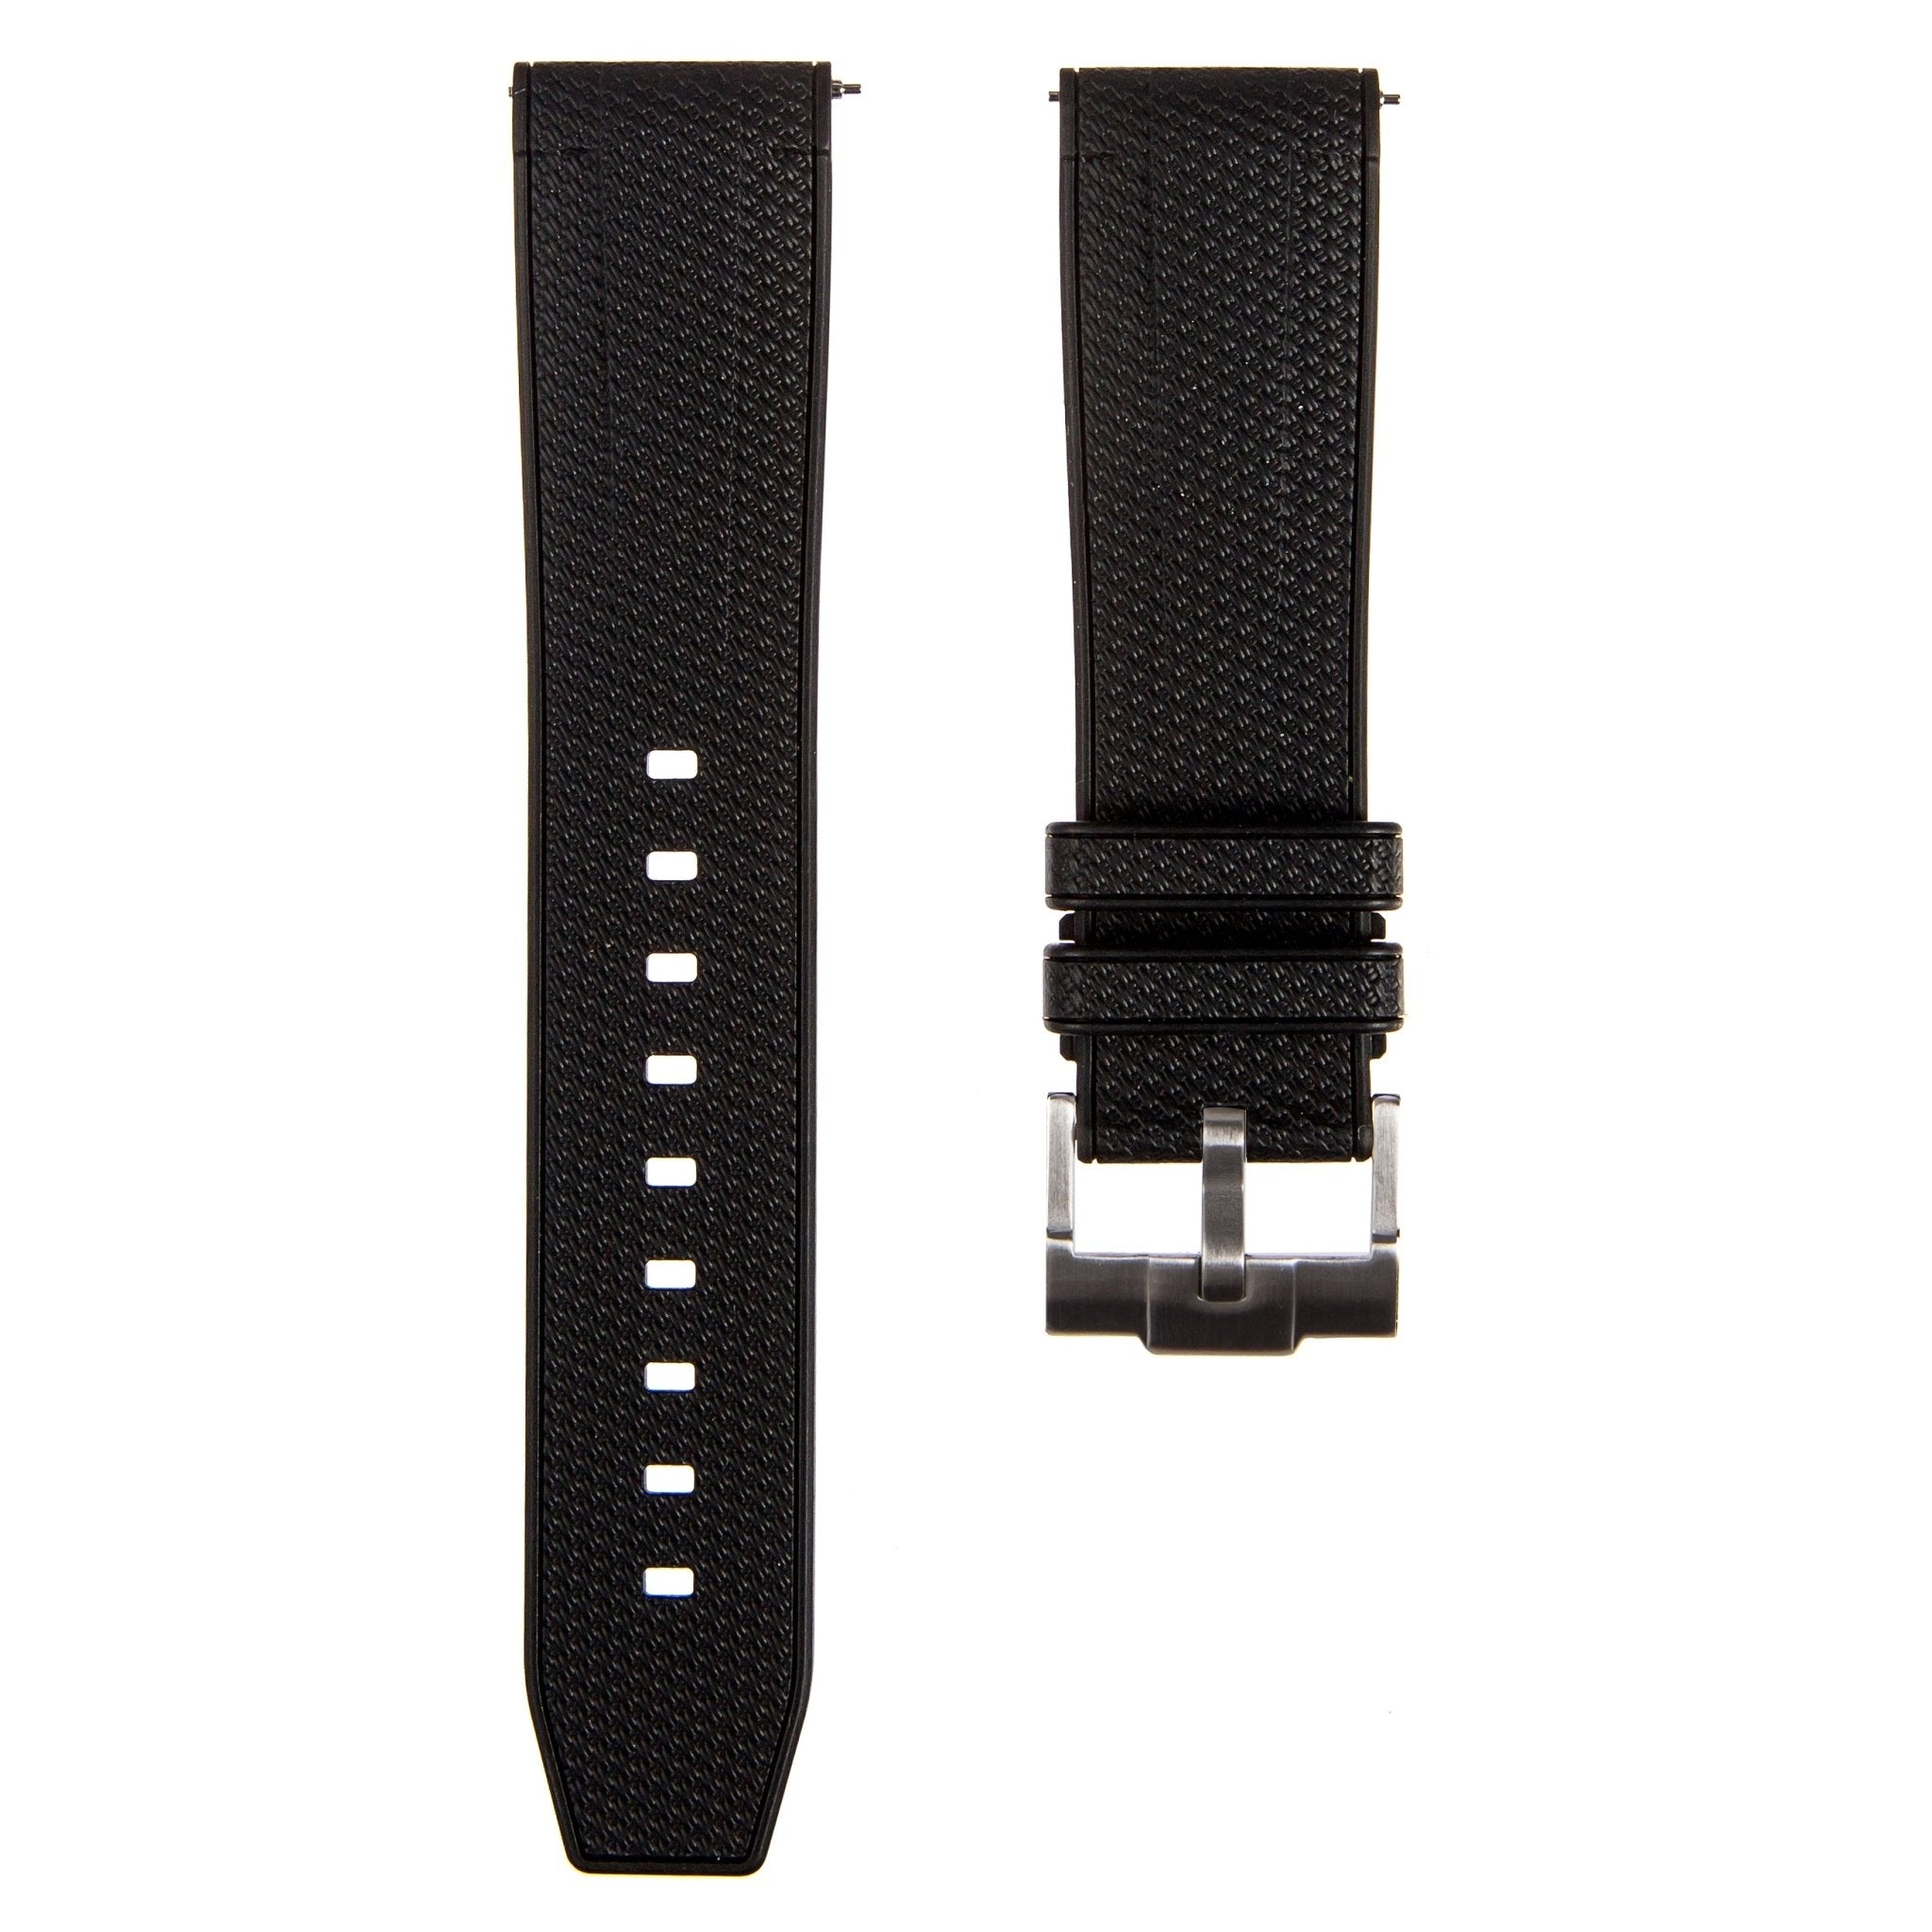 Flexweave Premium SIlicone Rubber Strap - Quick-Release - Compatible with Blancpain x Swatch – Black (2423) -Strapseeker